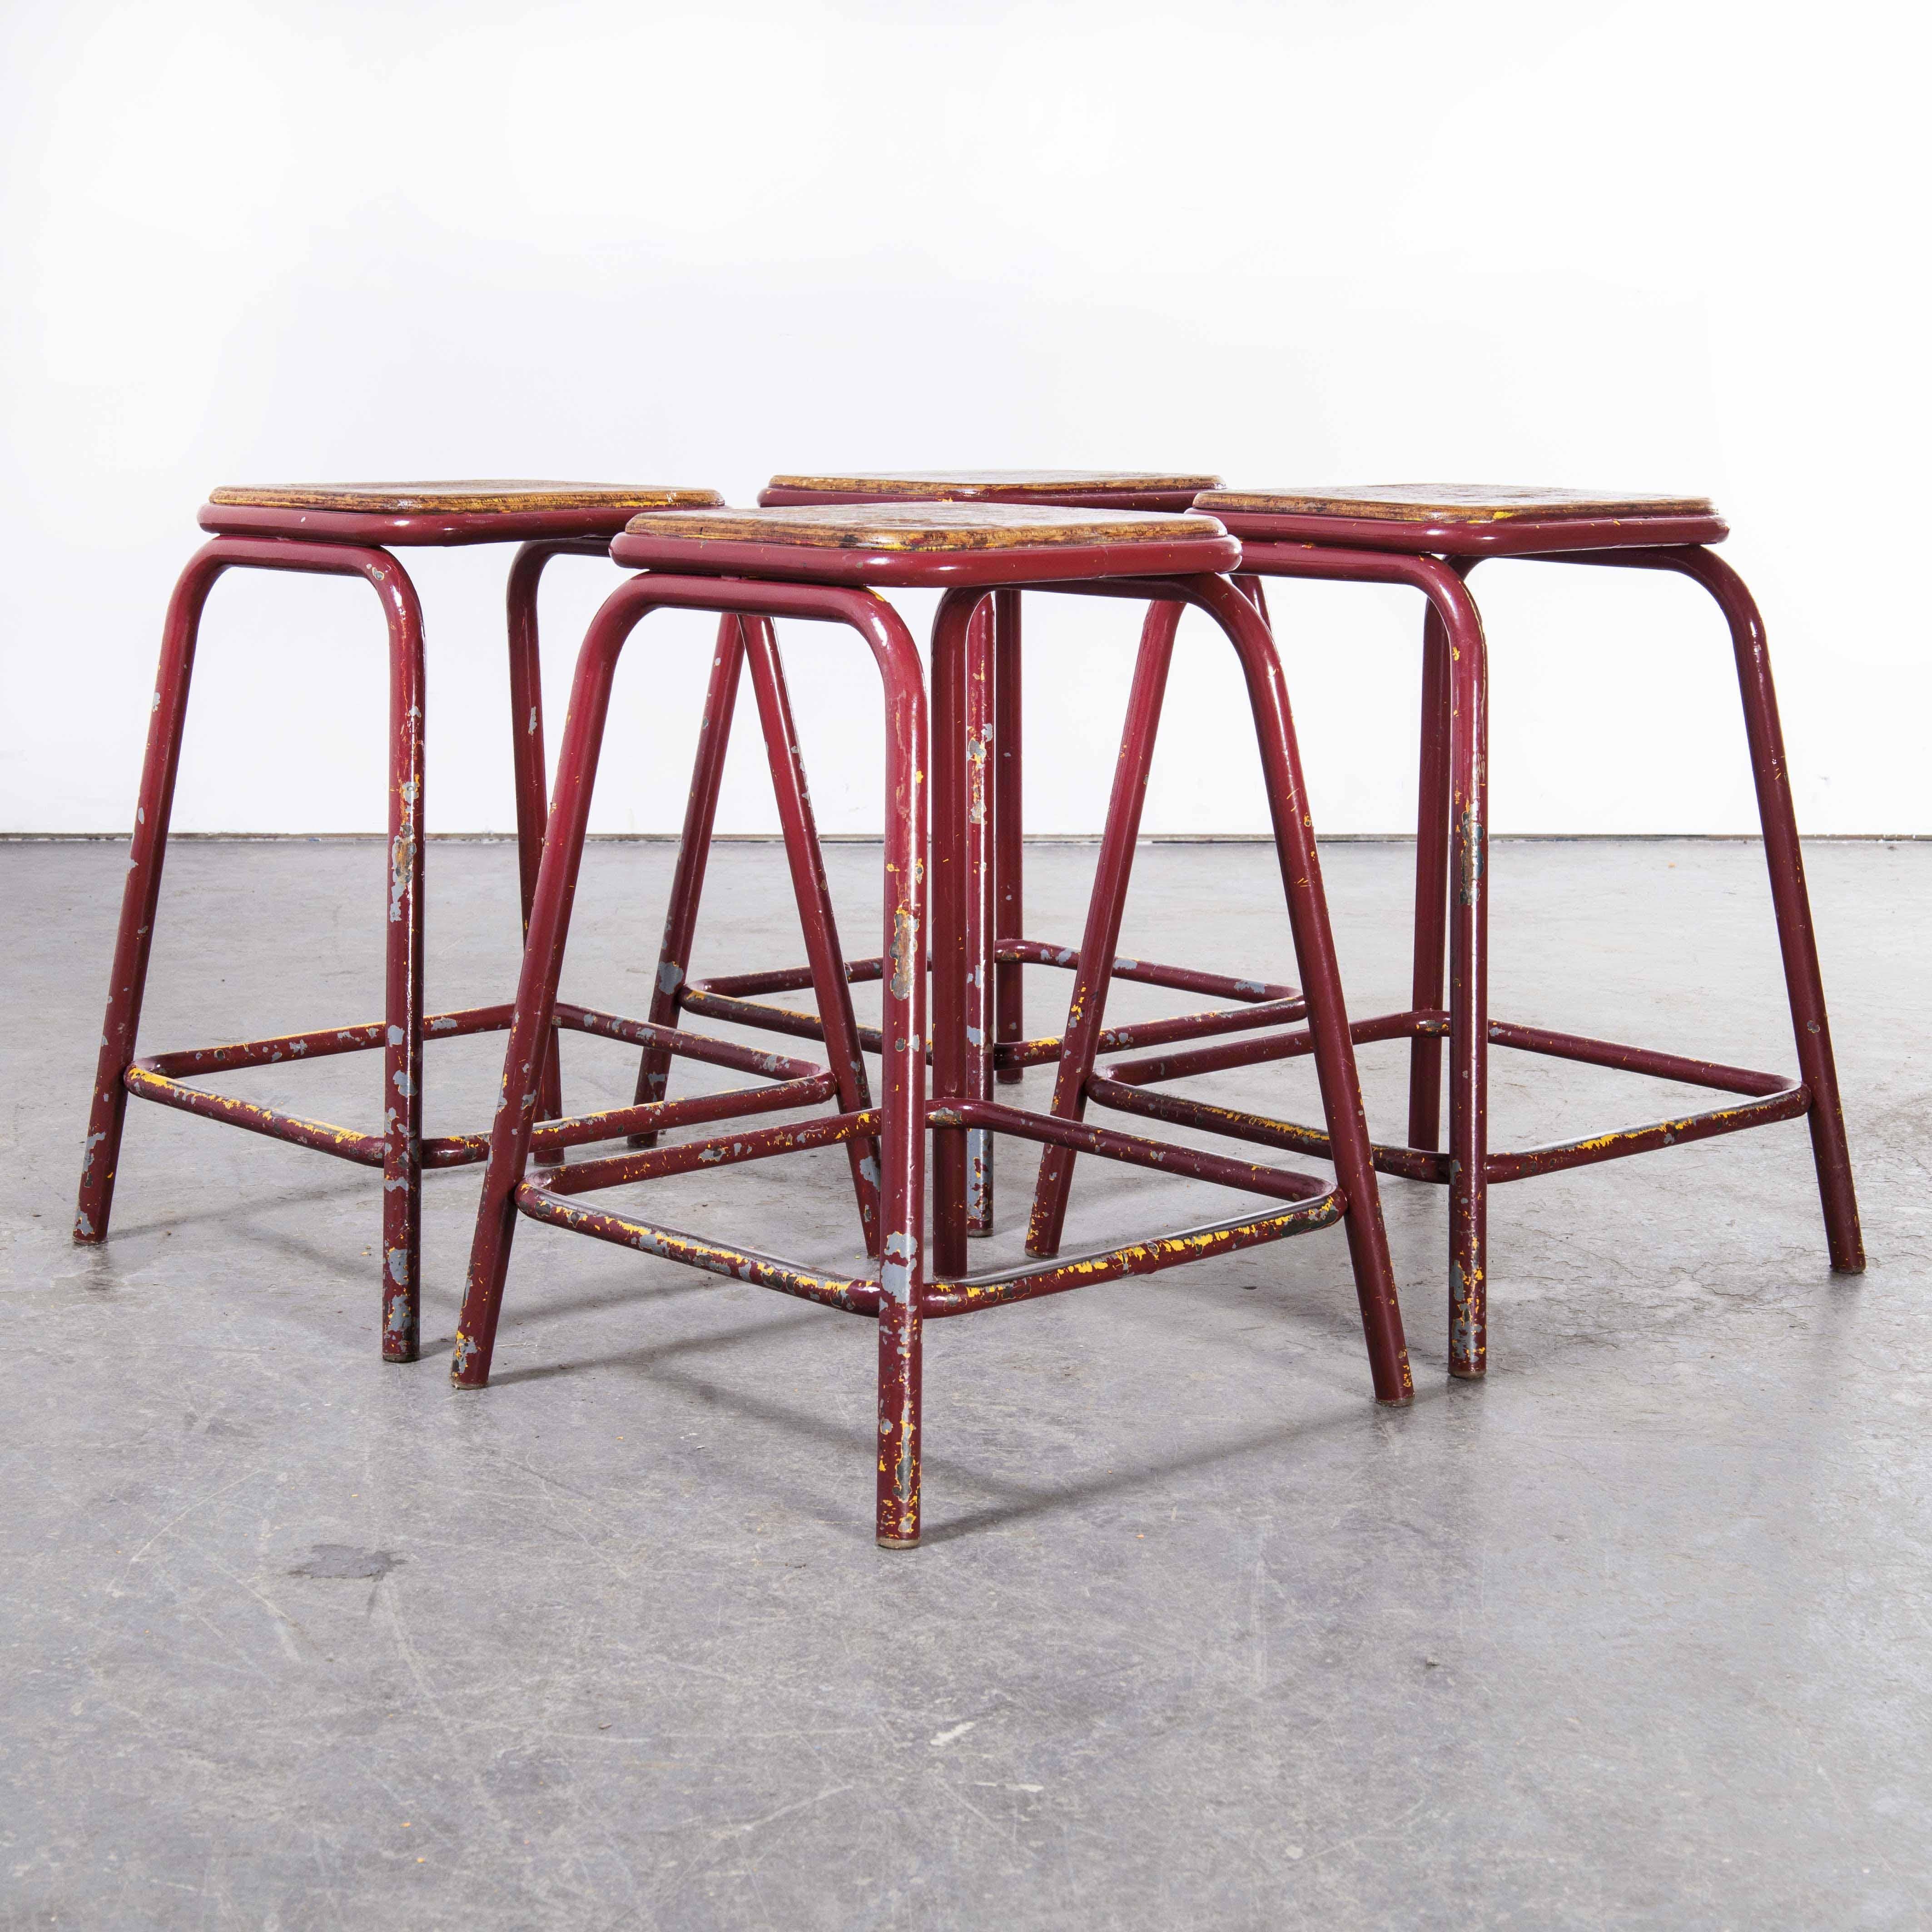 Birch 1950’s Mullca Industrial French Stacking Red Stools, Set of Four